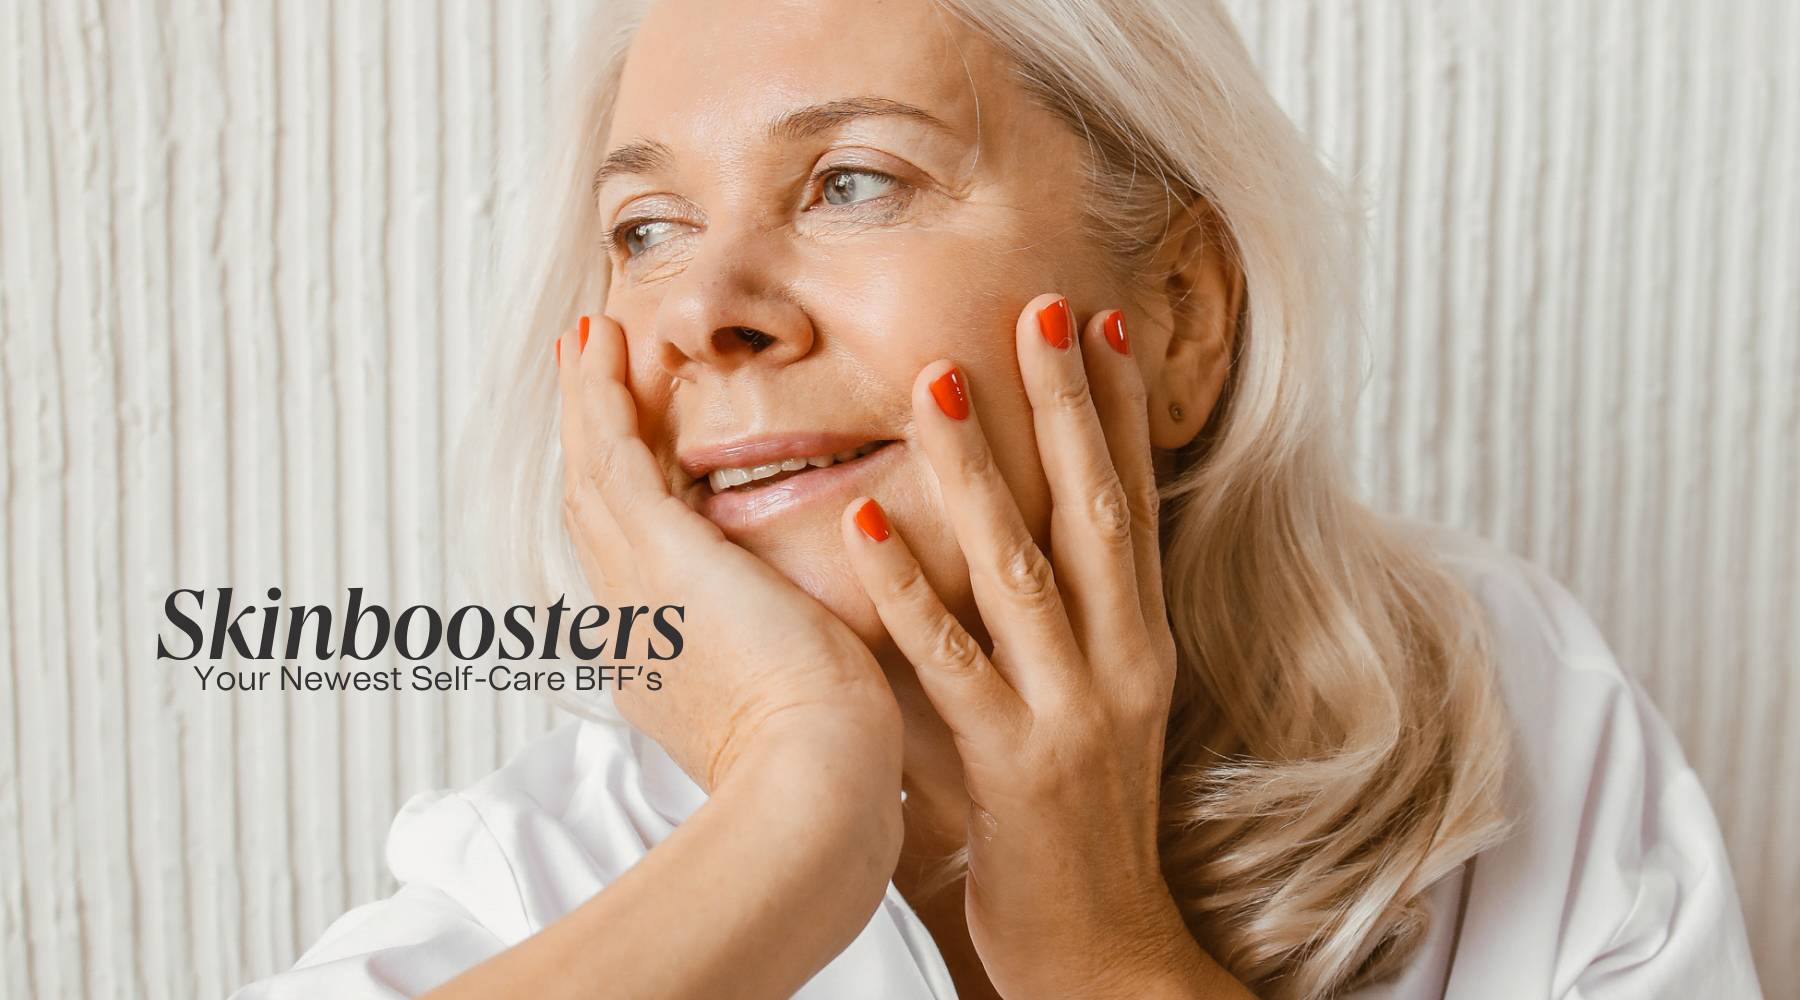 Skinboosters: Your Newest Skin Care BFFS